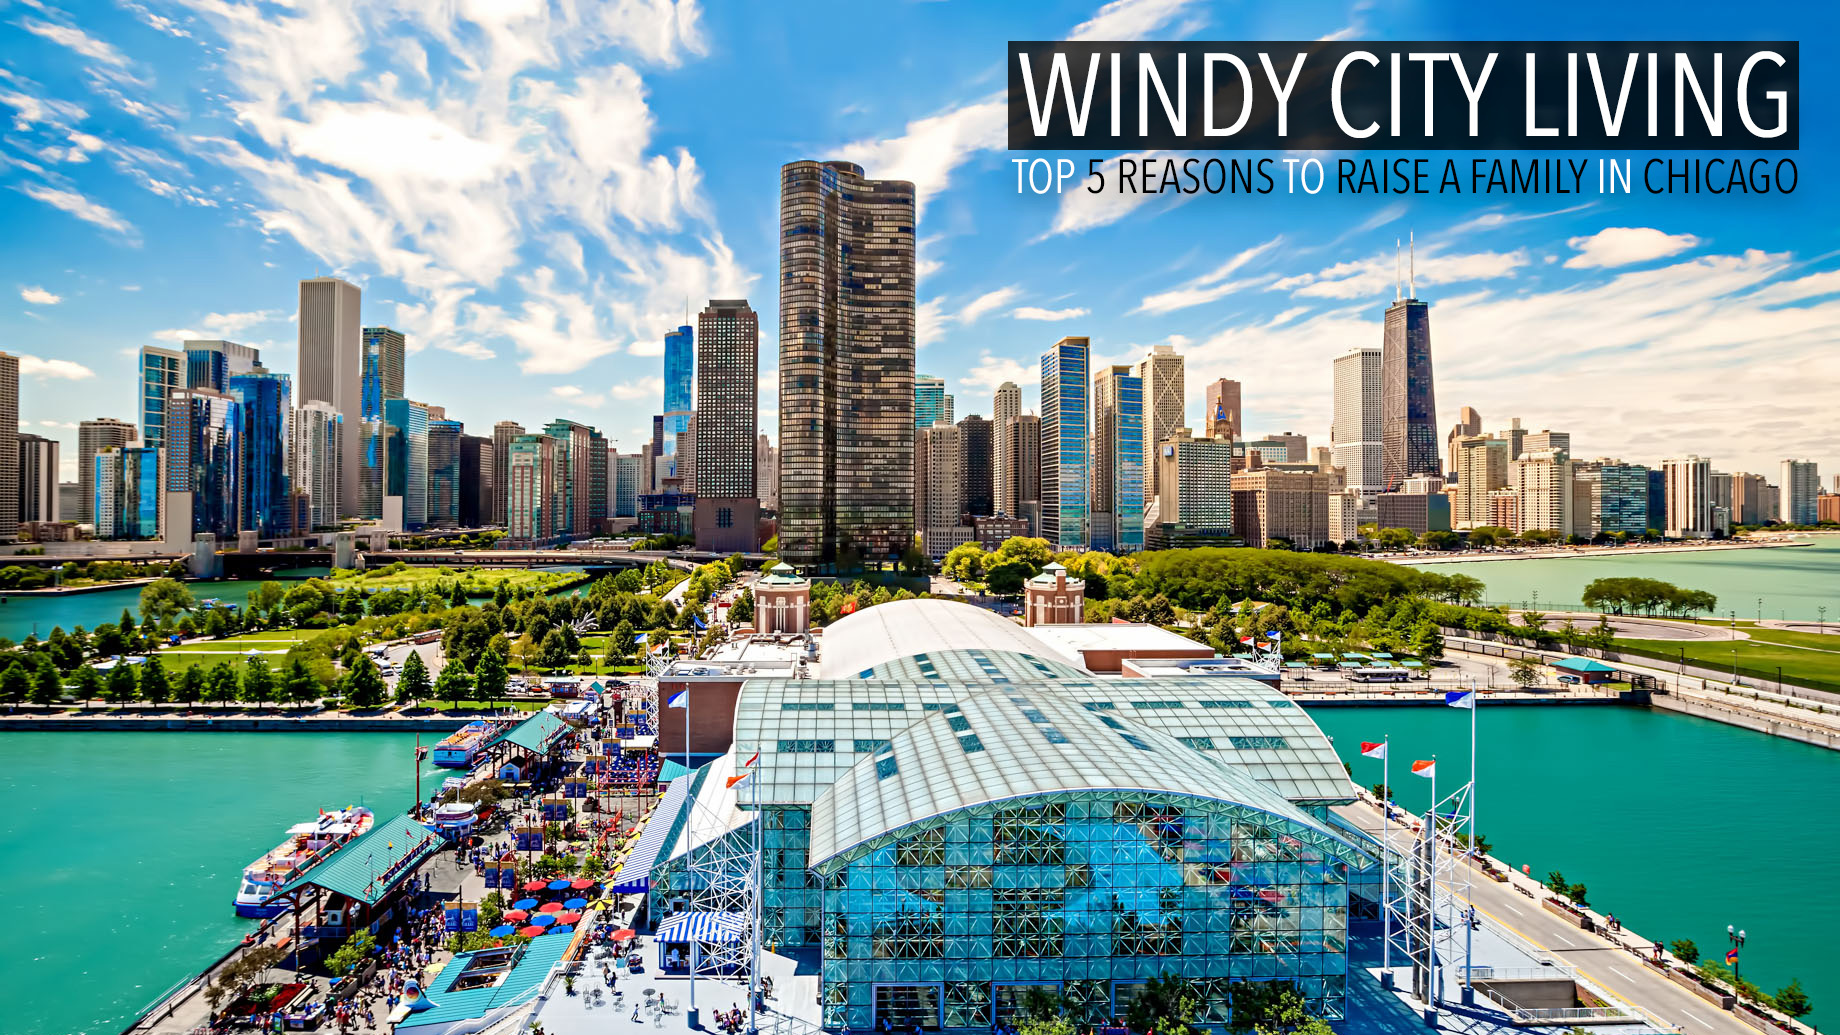 Windy City Living - Top 5 Reasons to Raise a Family in Chicago